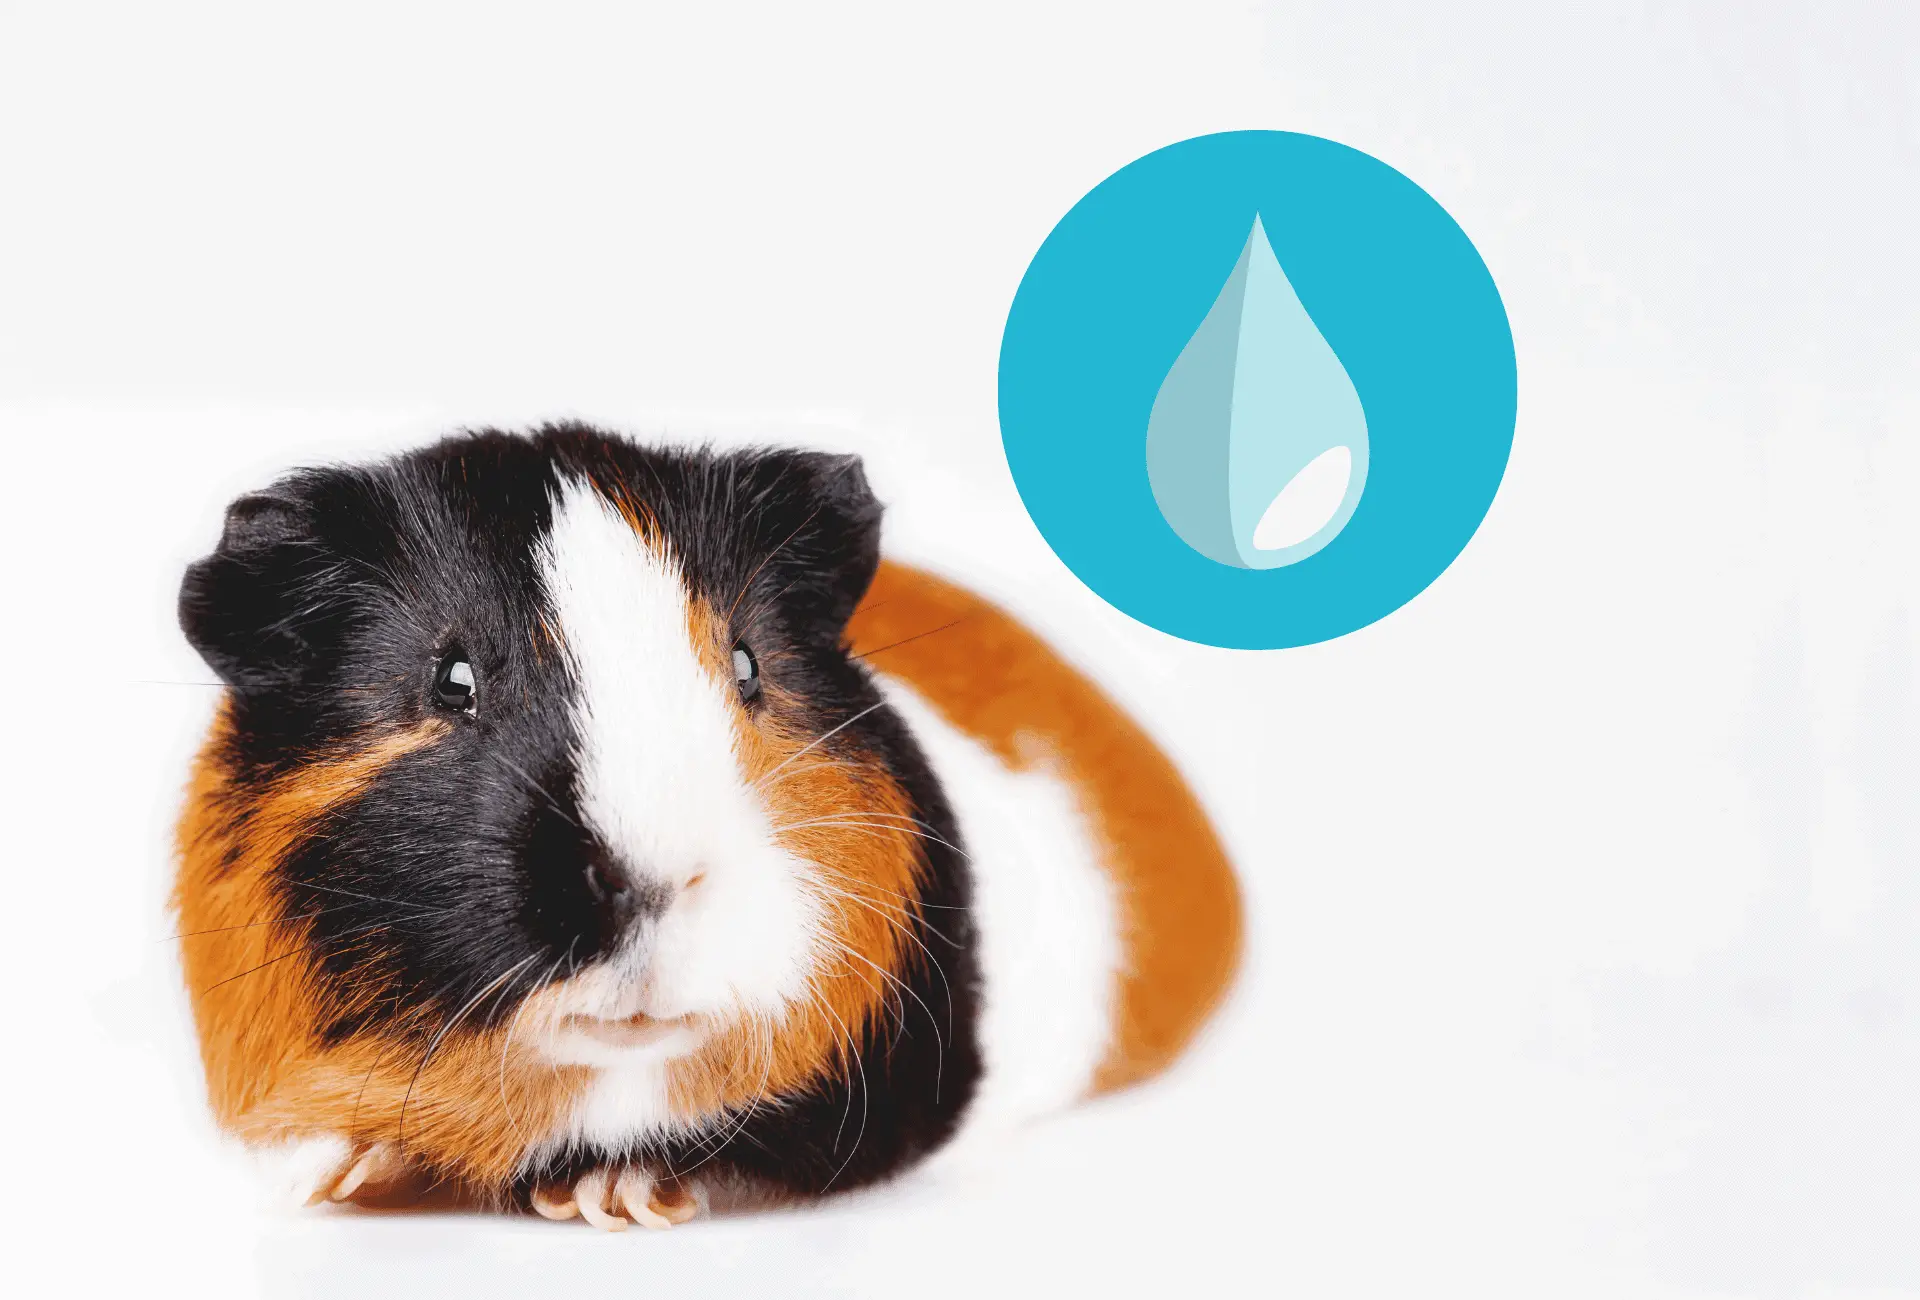 Guinea pig on white background with a water drop symbol in the top corner.